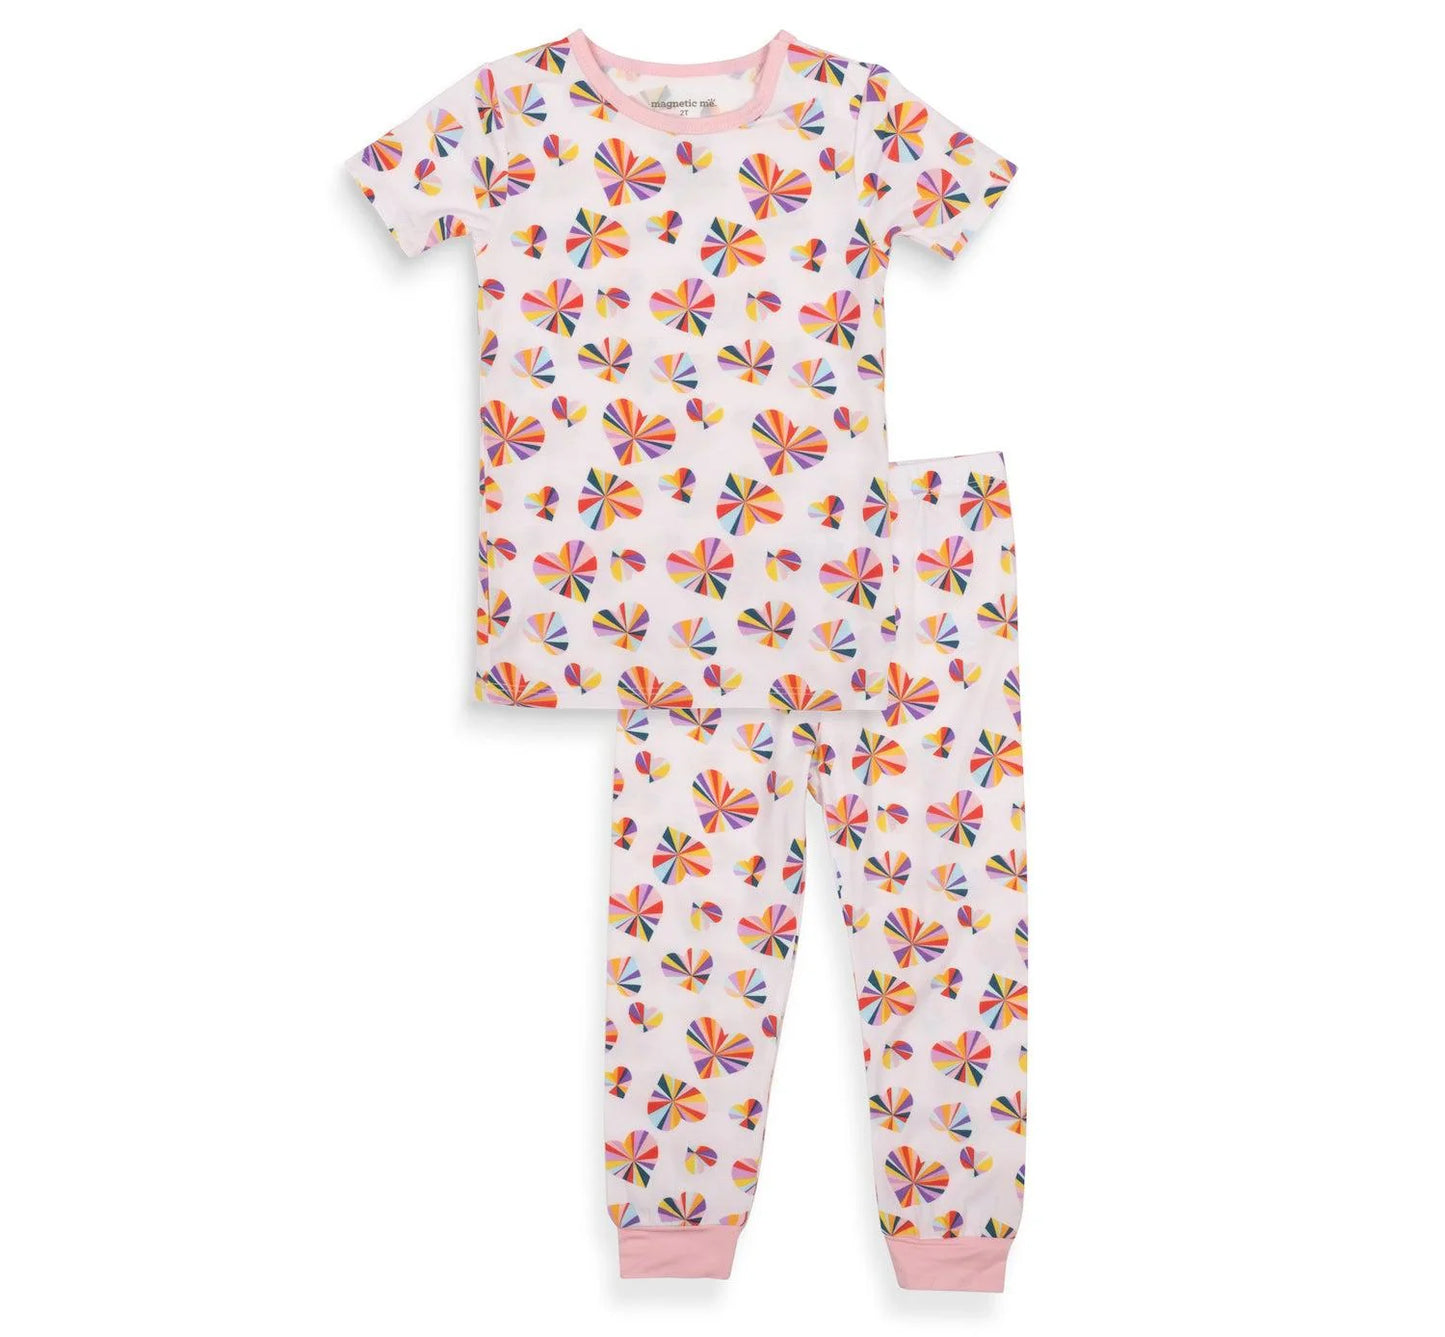 Groove Is In The Heart Toddler Two Piece Set